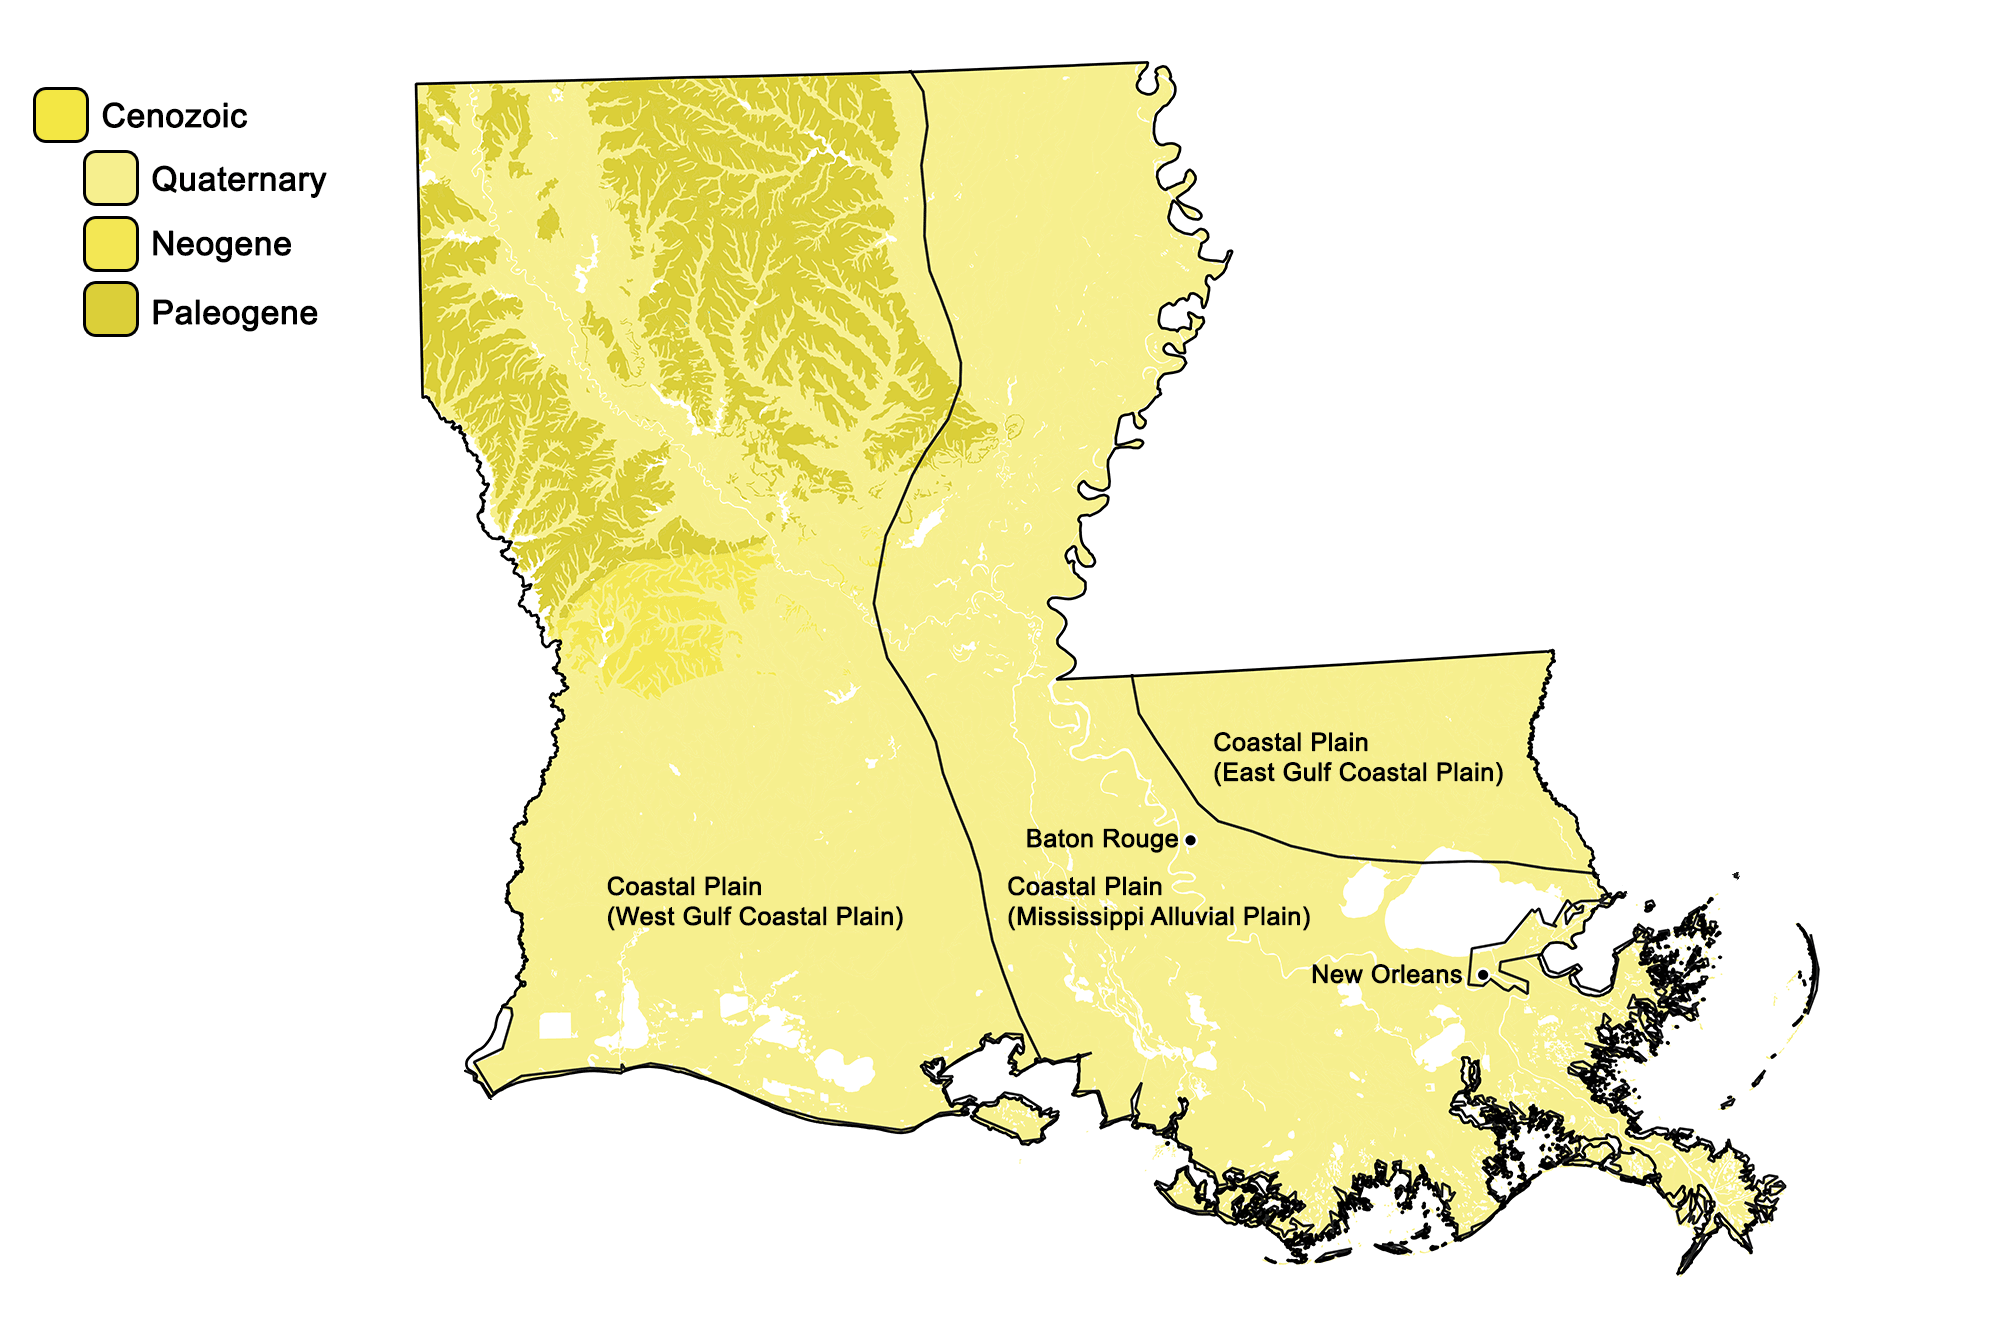 Geologic map of Louisiana with physiographic regions identified.